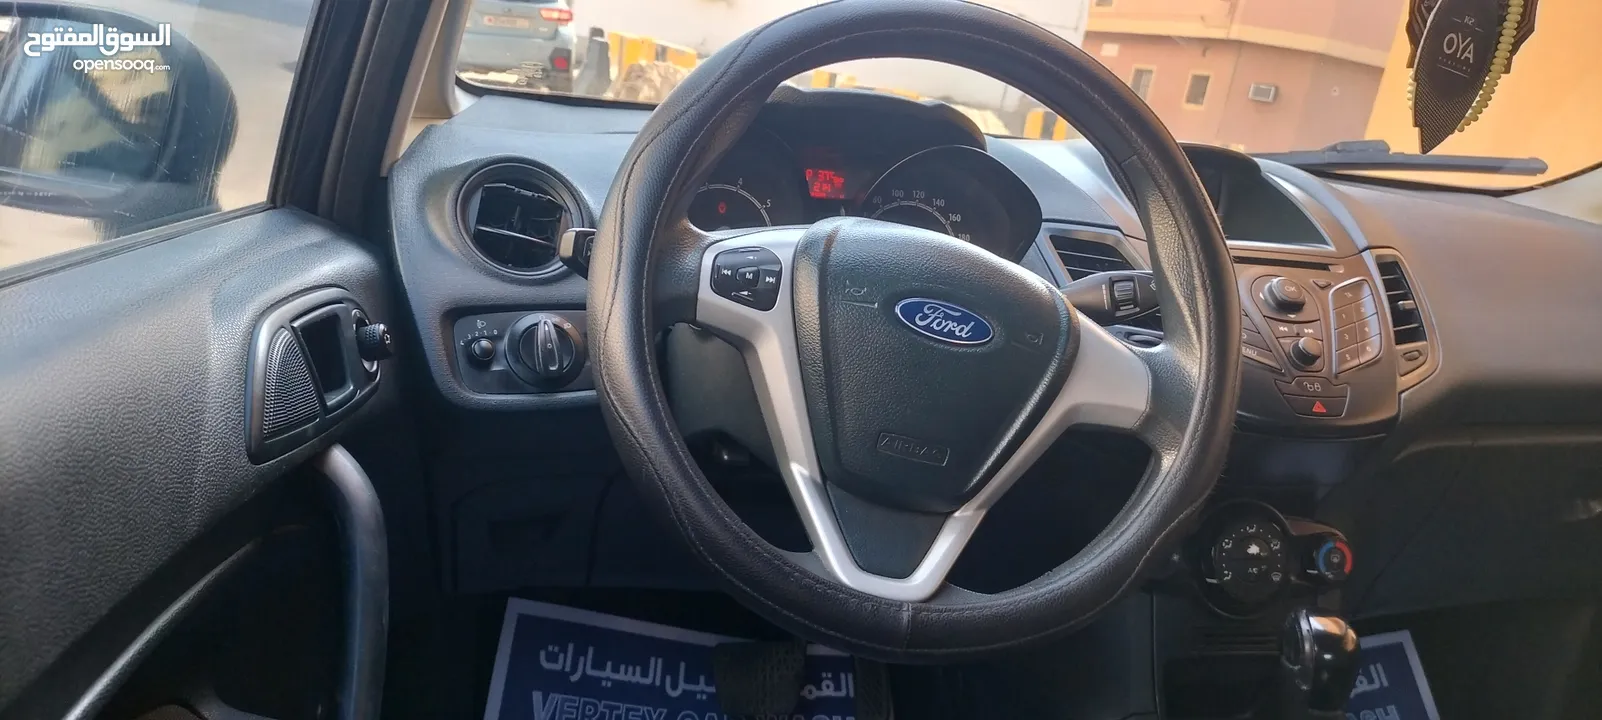 Ford Fiesta in good condition